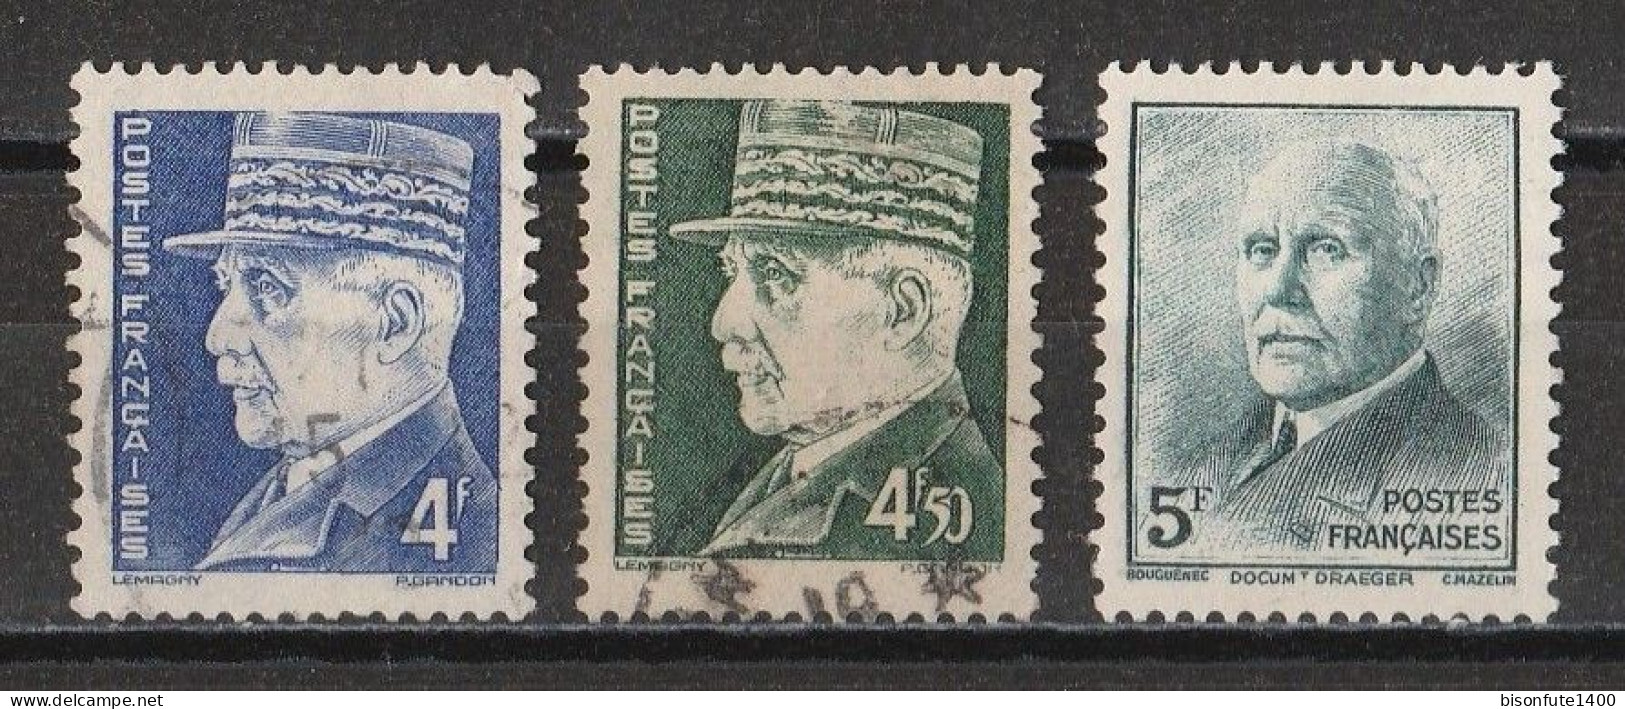 France 1941-42 : Timbres Yvert & Tellier N° 505 - 506 - 507 - 508 - 509 - 510 - 510a - 511 - 512 - 514 - 515 - 516 -... - Usados